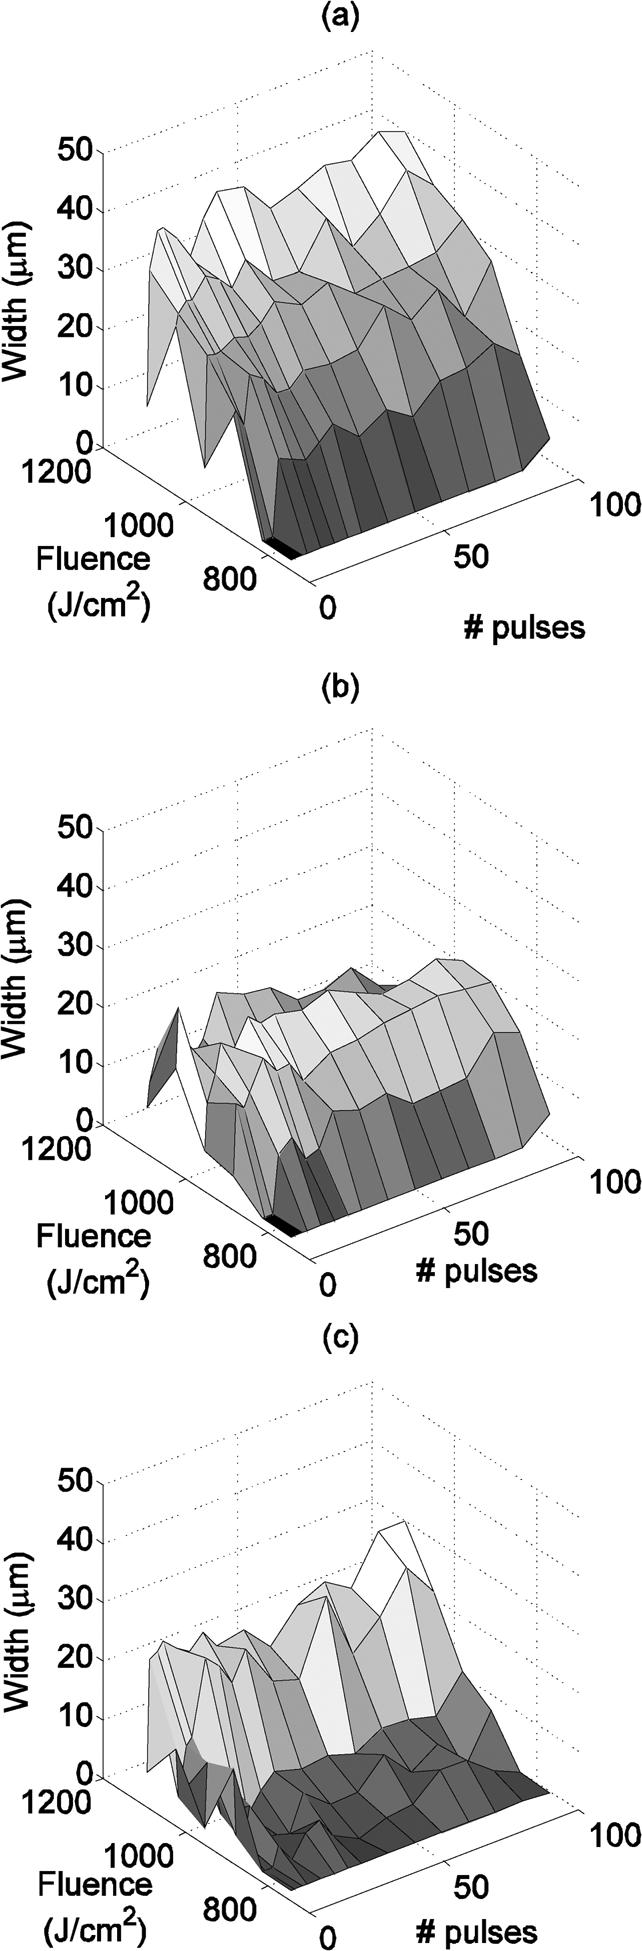 852 JOURNAL OF LIGHTWAVE TECHNOLOGY, VOL. 29, NO. 6, MARCH 15, 2011 Fig. 2. Dark zones widths at 20 KHz and = 12 ns for different number of pulses and different values of fluence. (a) Along x-axis.